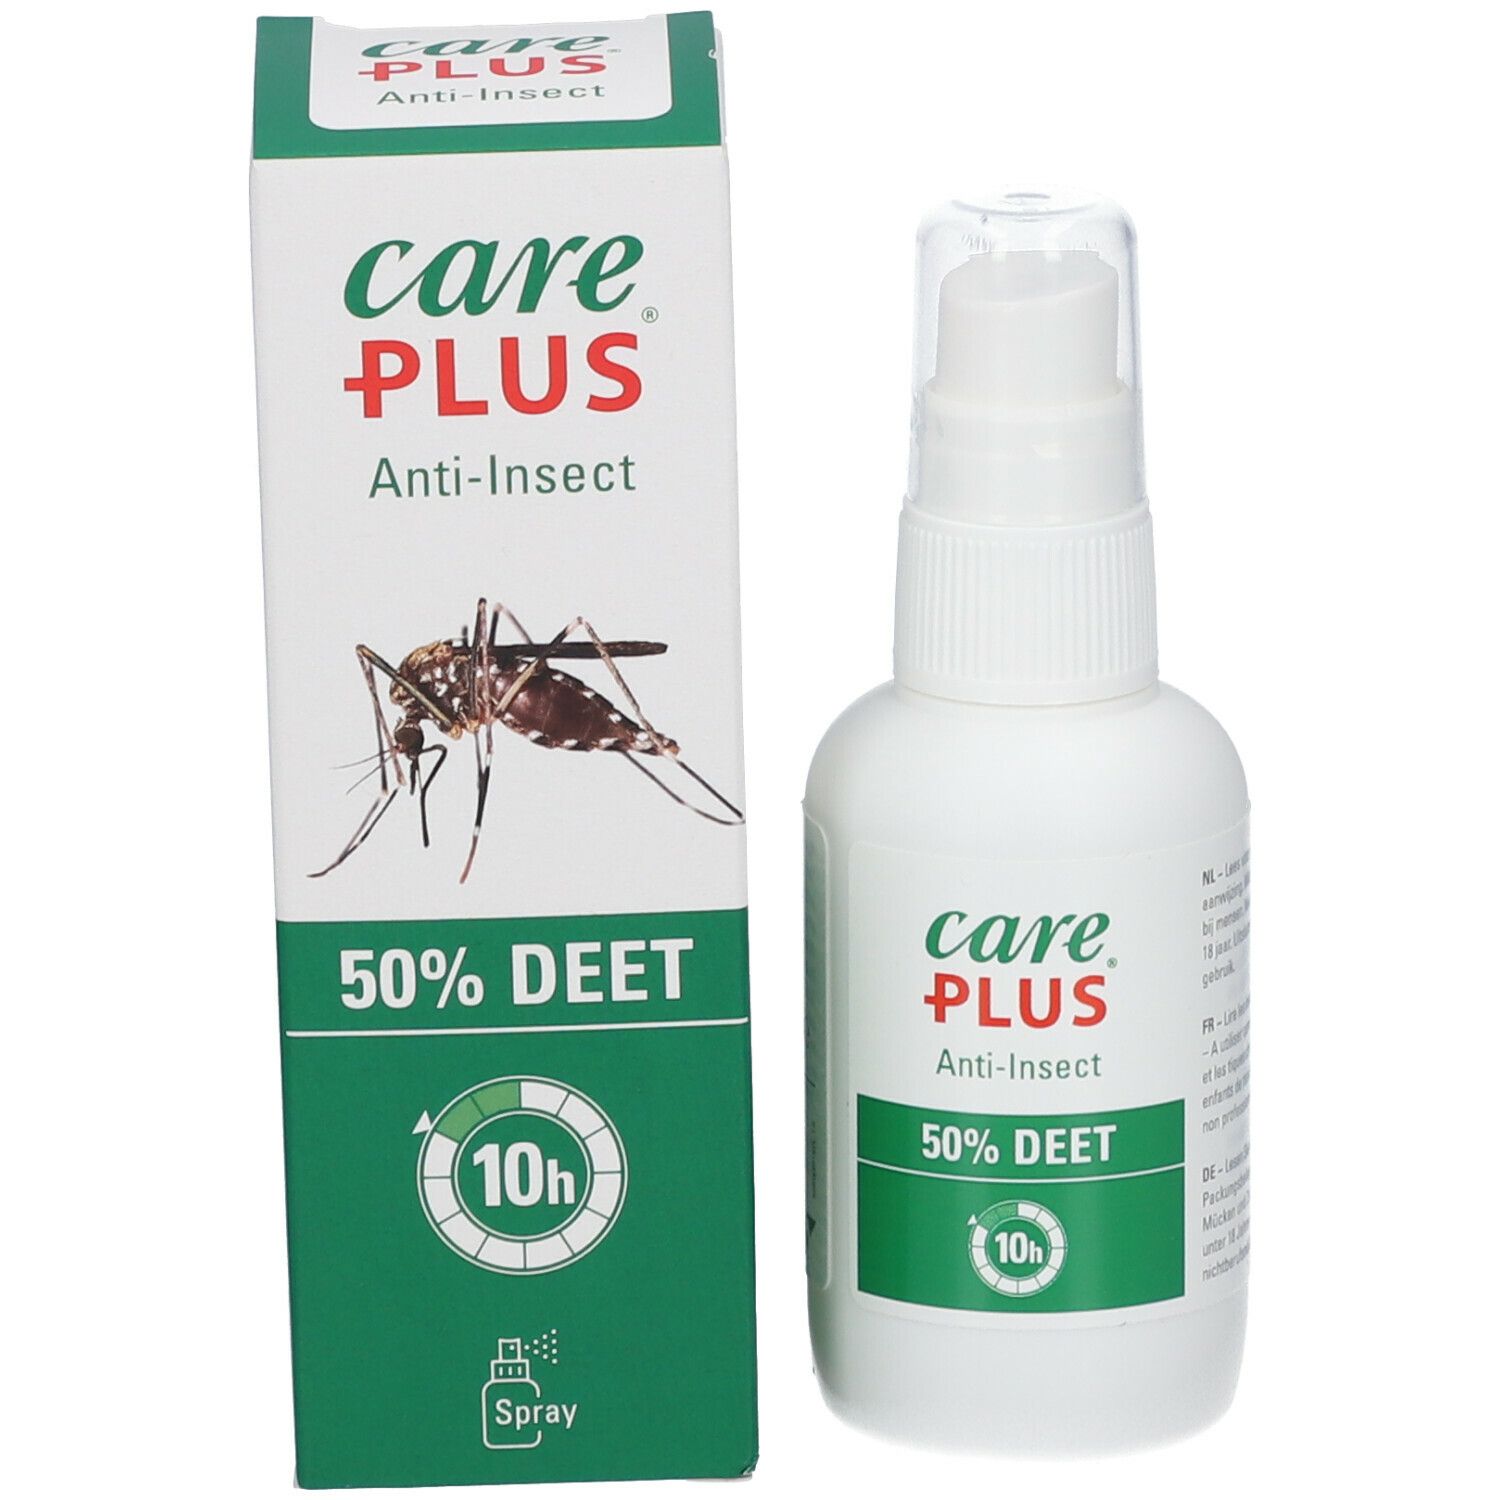 Care Plus® Anti-Insect Spray 50% DEET